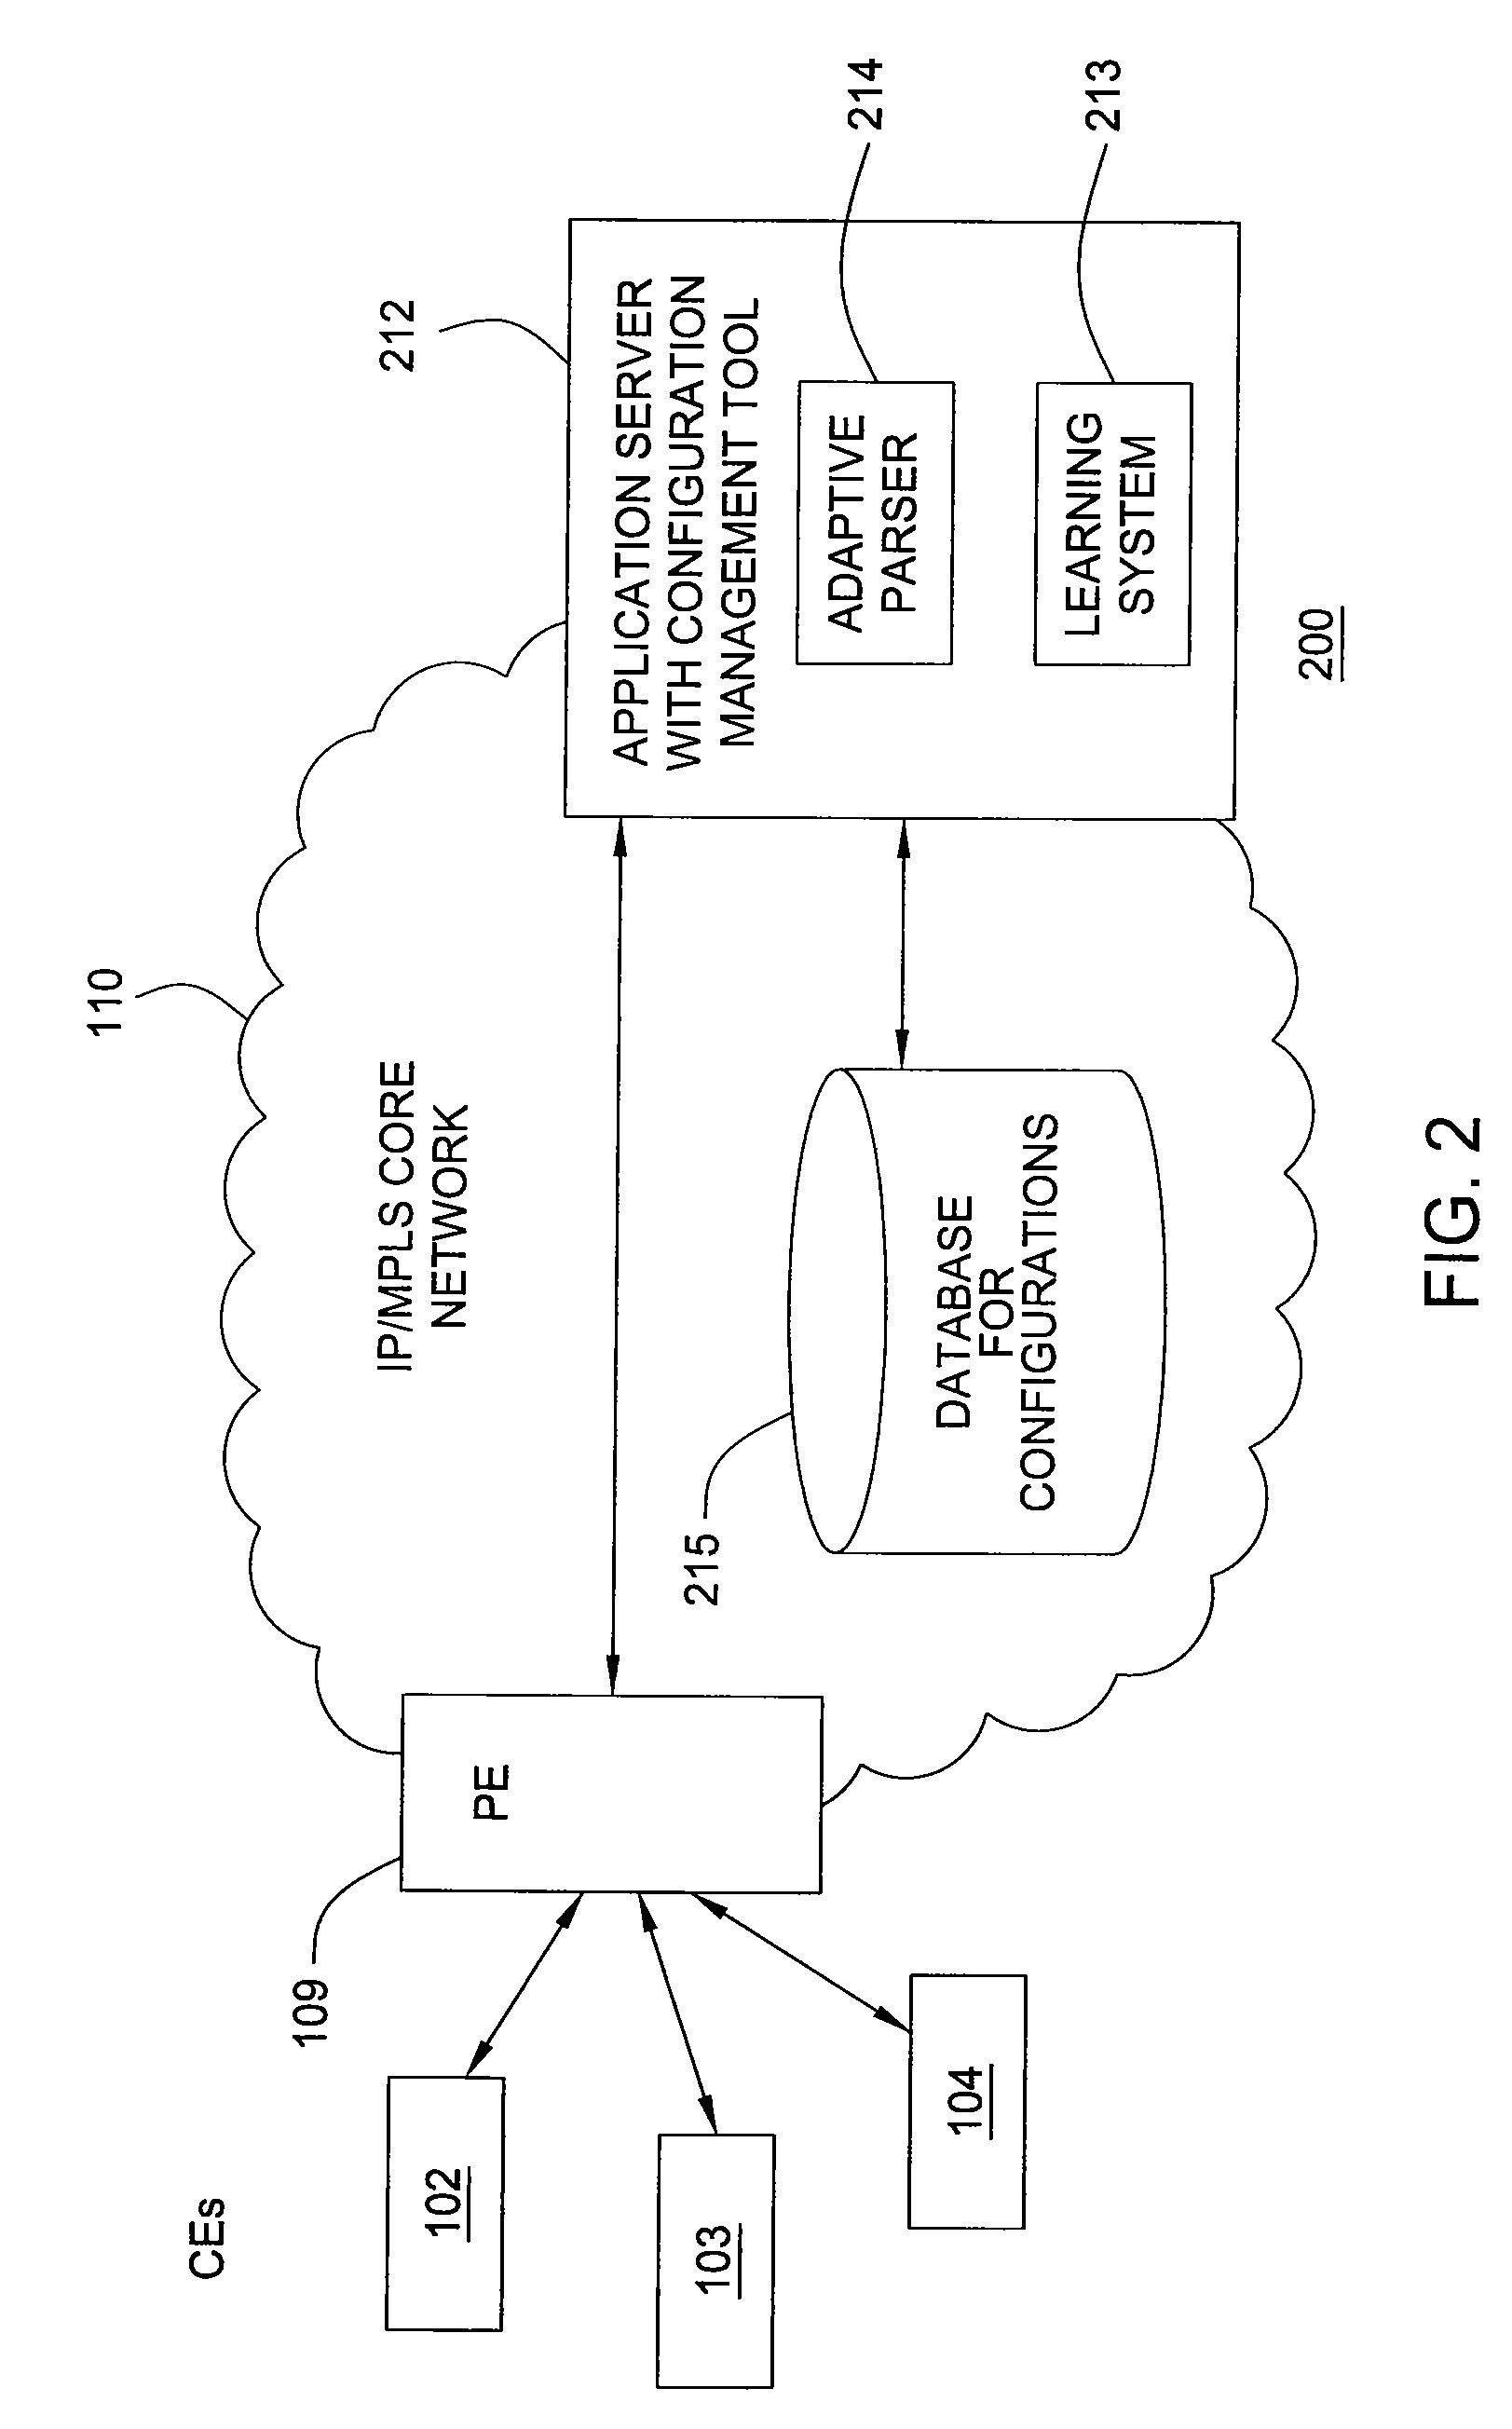 Method and apparatus for providing an adaptive parser